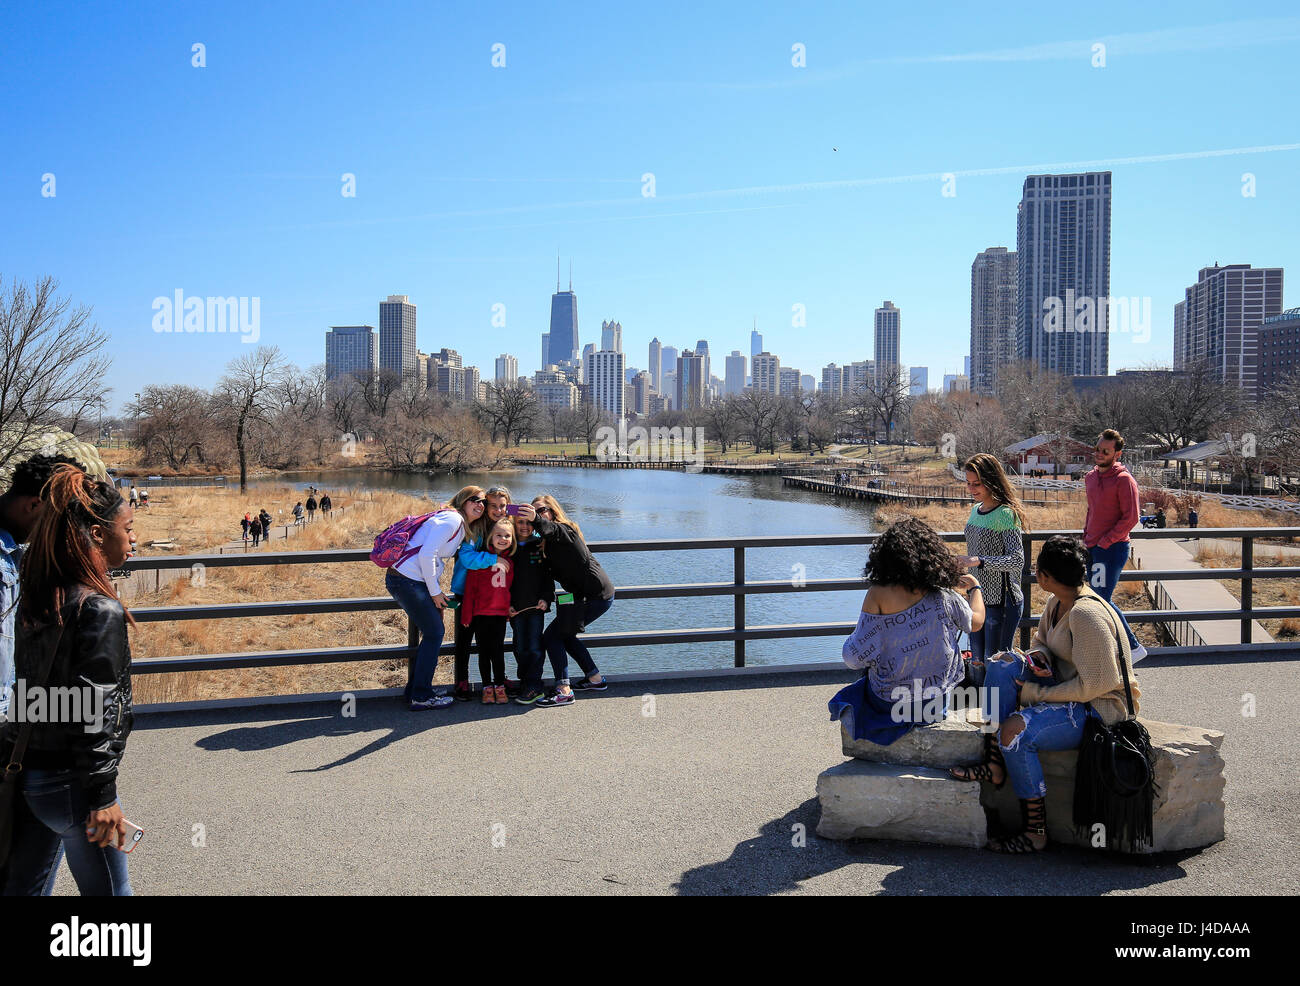 Street scene at Lincoln Park Zoo in front of Skyline Chicago, Chicago, Illinois, USA, North America, Stra§enszene am Lincoln Park Zoo vor Skyline Chic Stock Photo